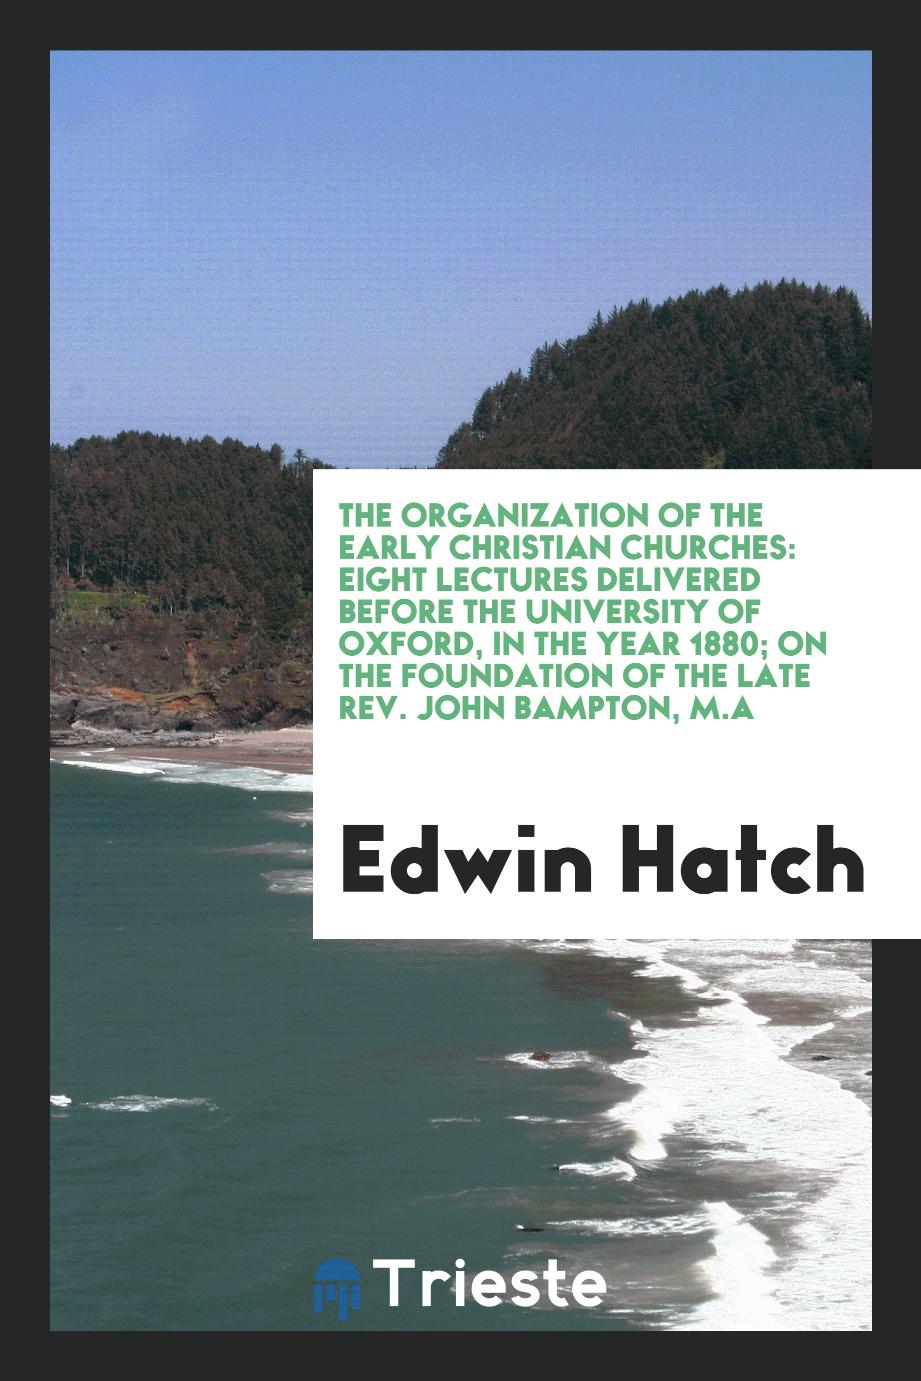 The organization of the early Christian churches: eight lectures delivered before the University of Oxford, in the year 1880; on the foundation of the late Rev. John Bampton, M.A